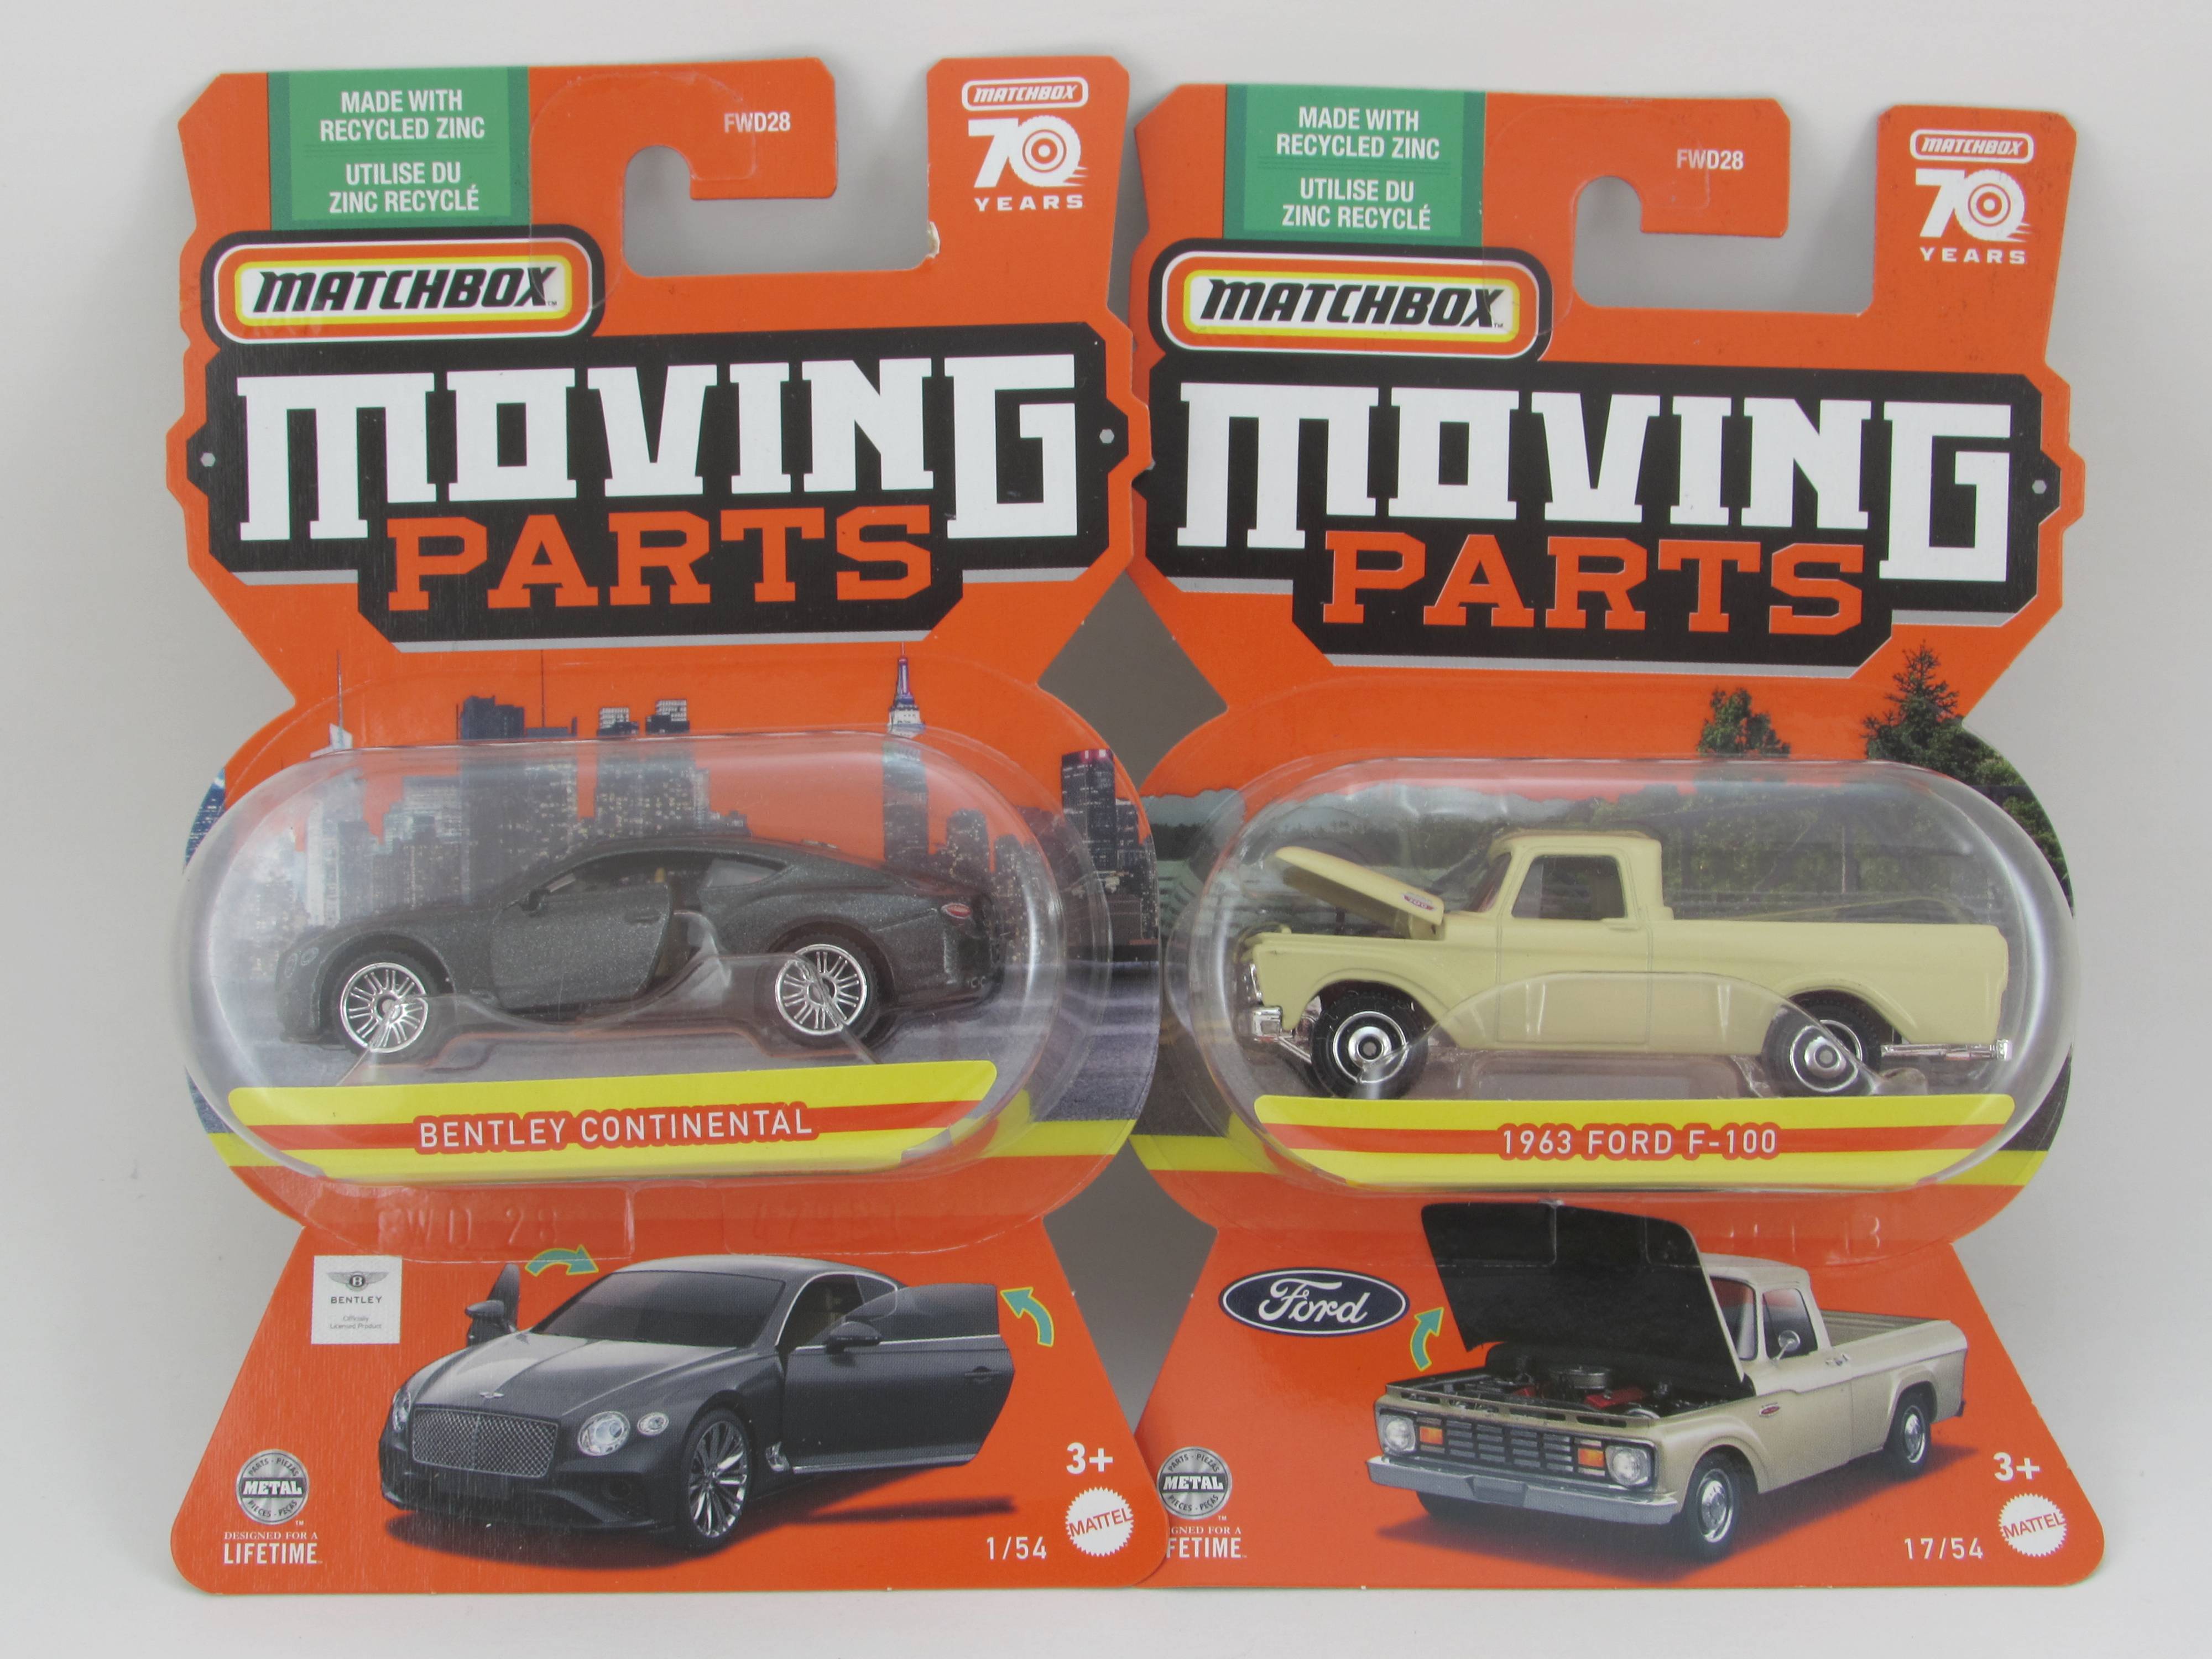 MATCHBOX 2022 MOVING PARTS FACTORY SEALED CASE B (8 Cars)